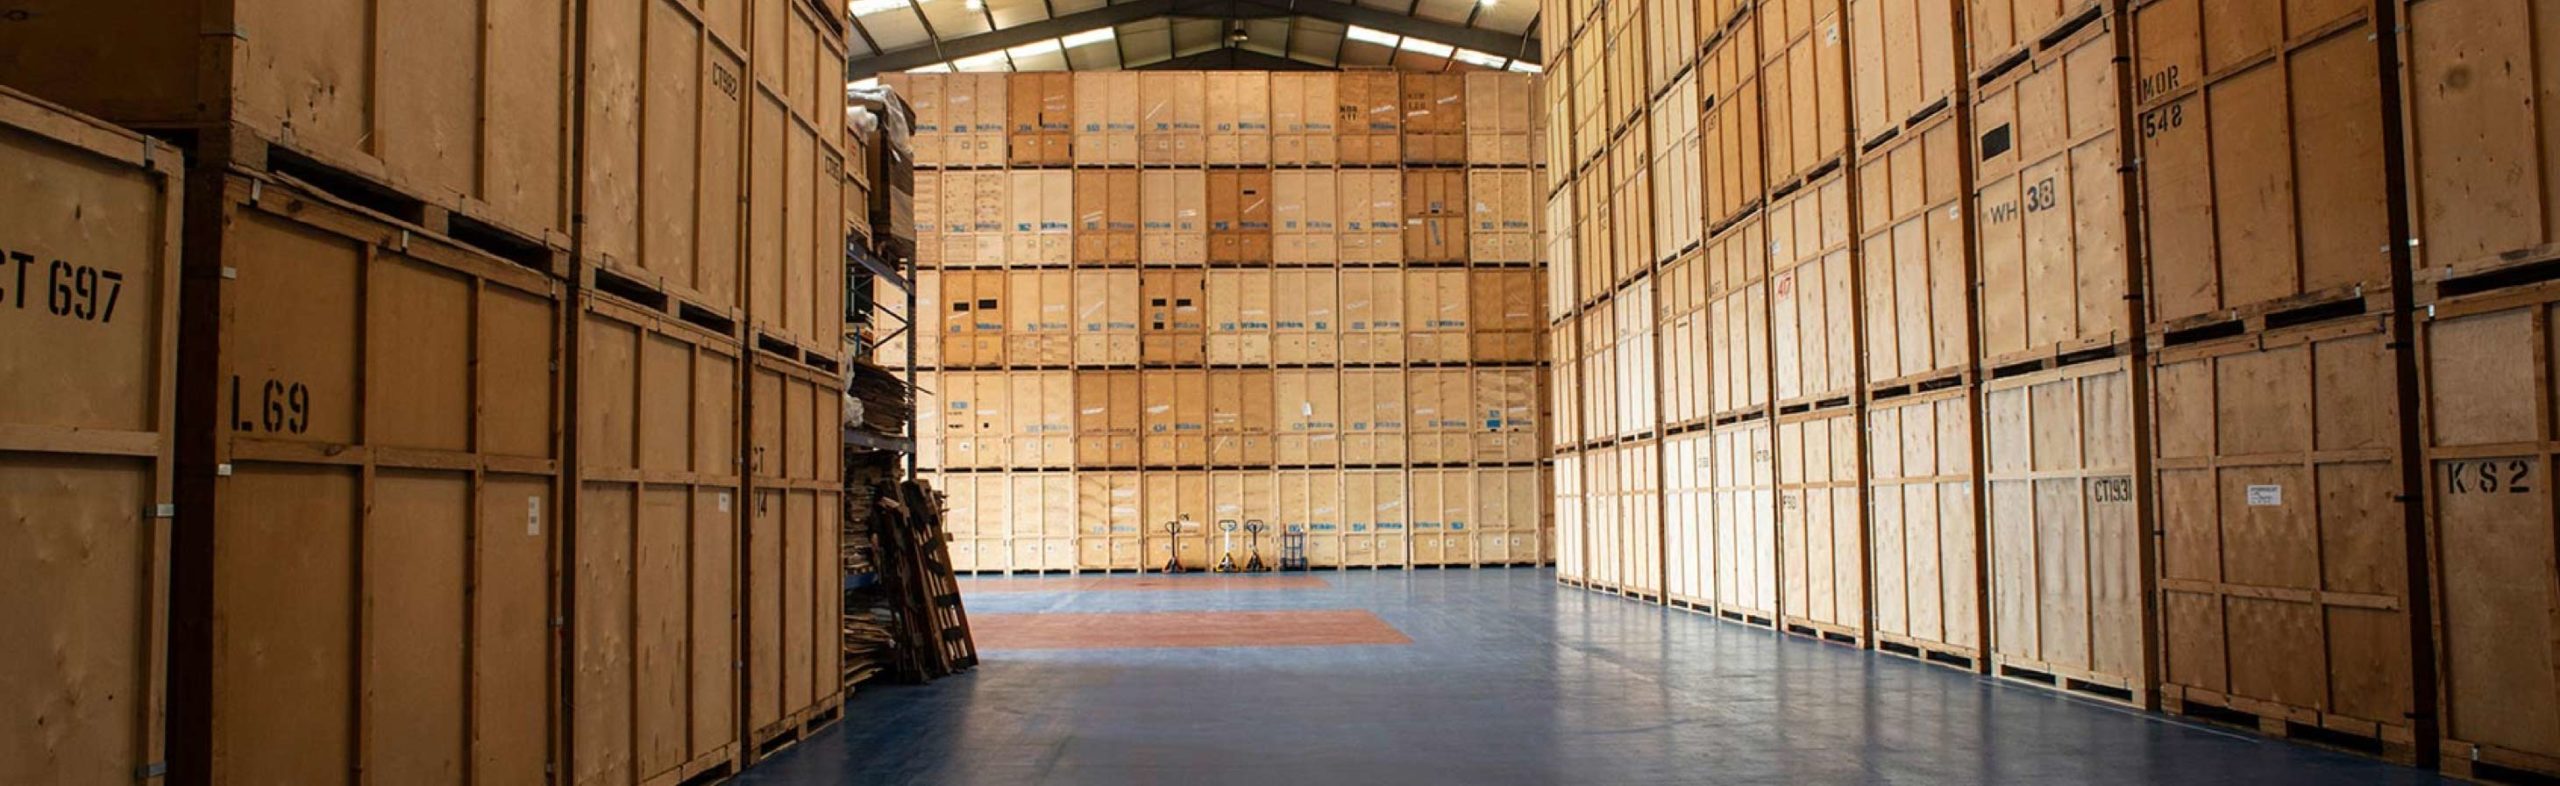 Our storage facilities give you security, safety & flexibility